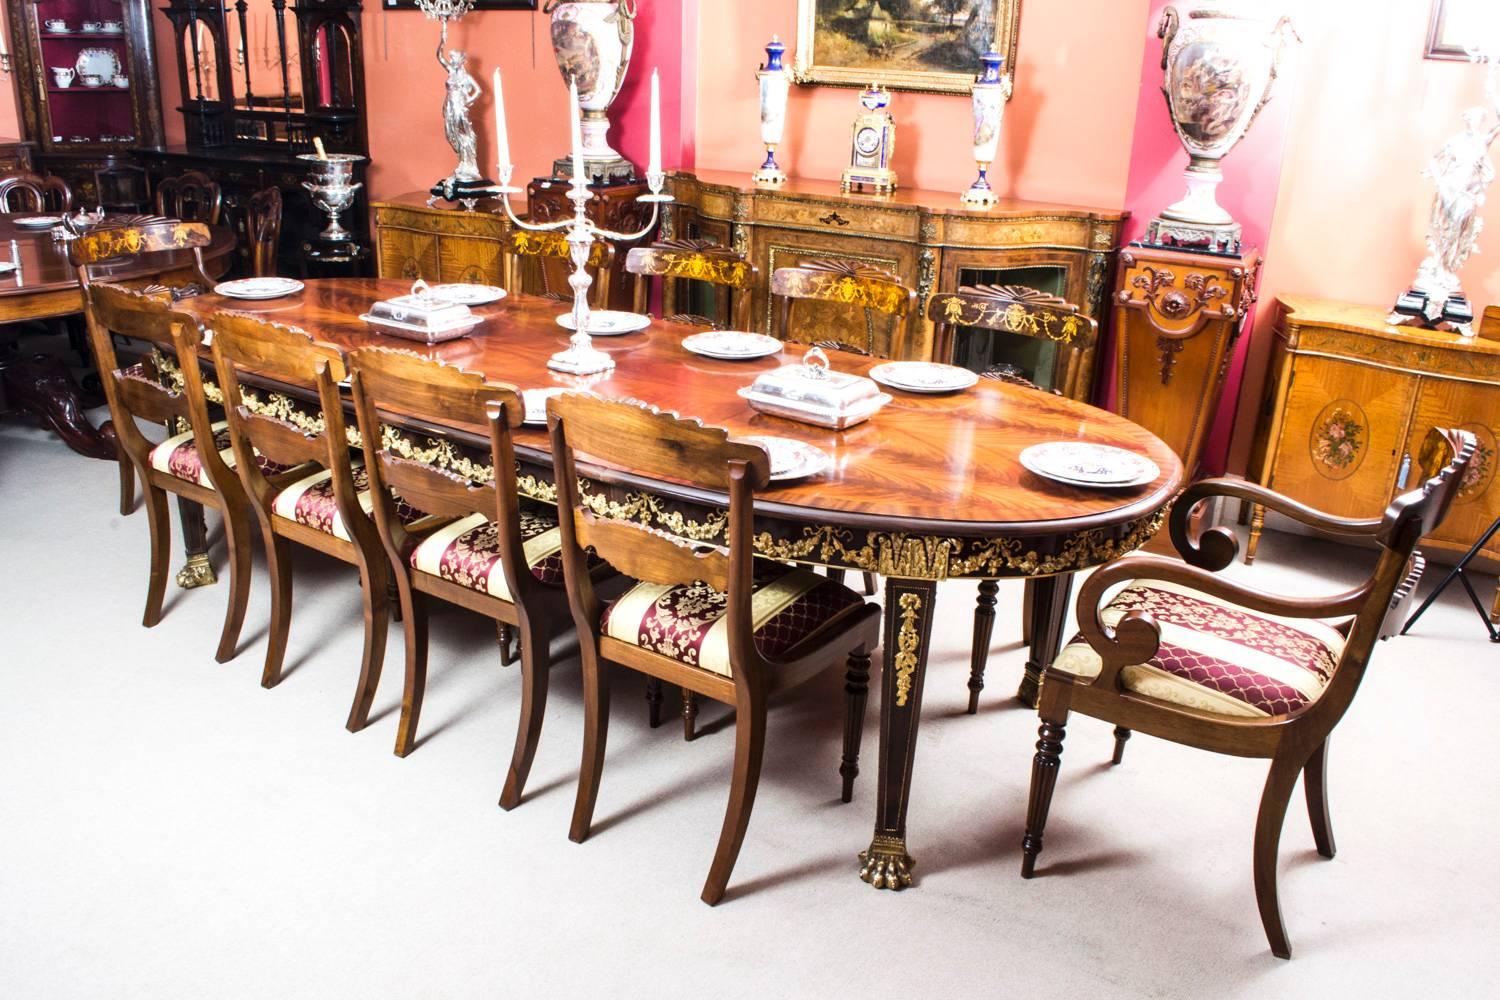 This is a very impressive and rare antique extending dining table in the neoclassical style, circa 1920 in date, with a matching set of ten burr walnut and inlaid dining chairs.

The table is made of flame mahogany and is decorated with a